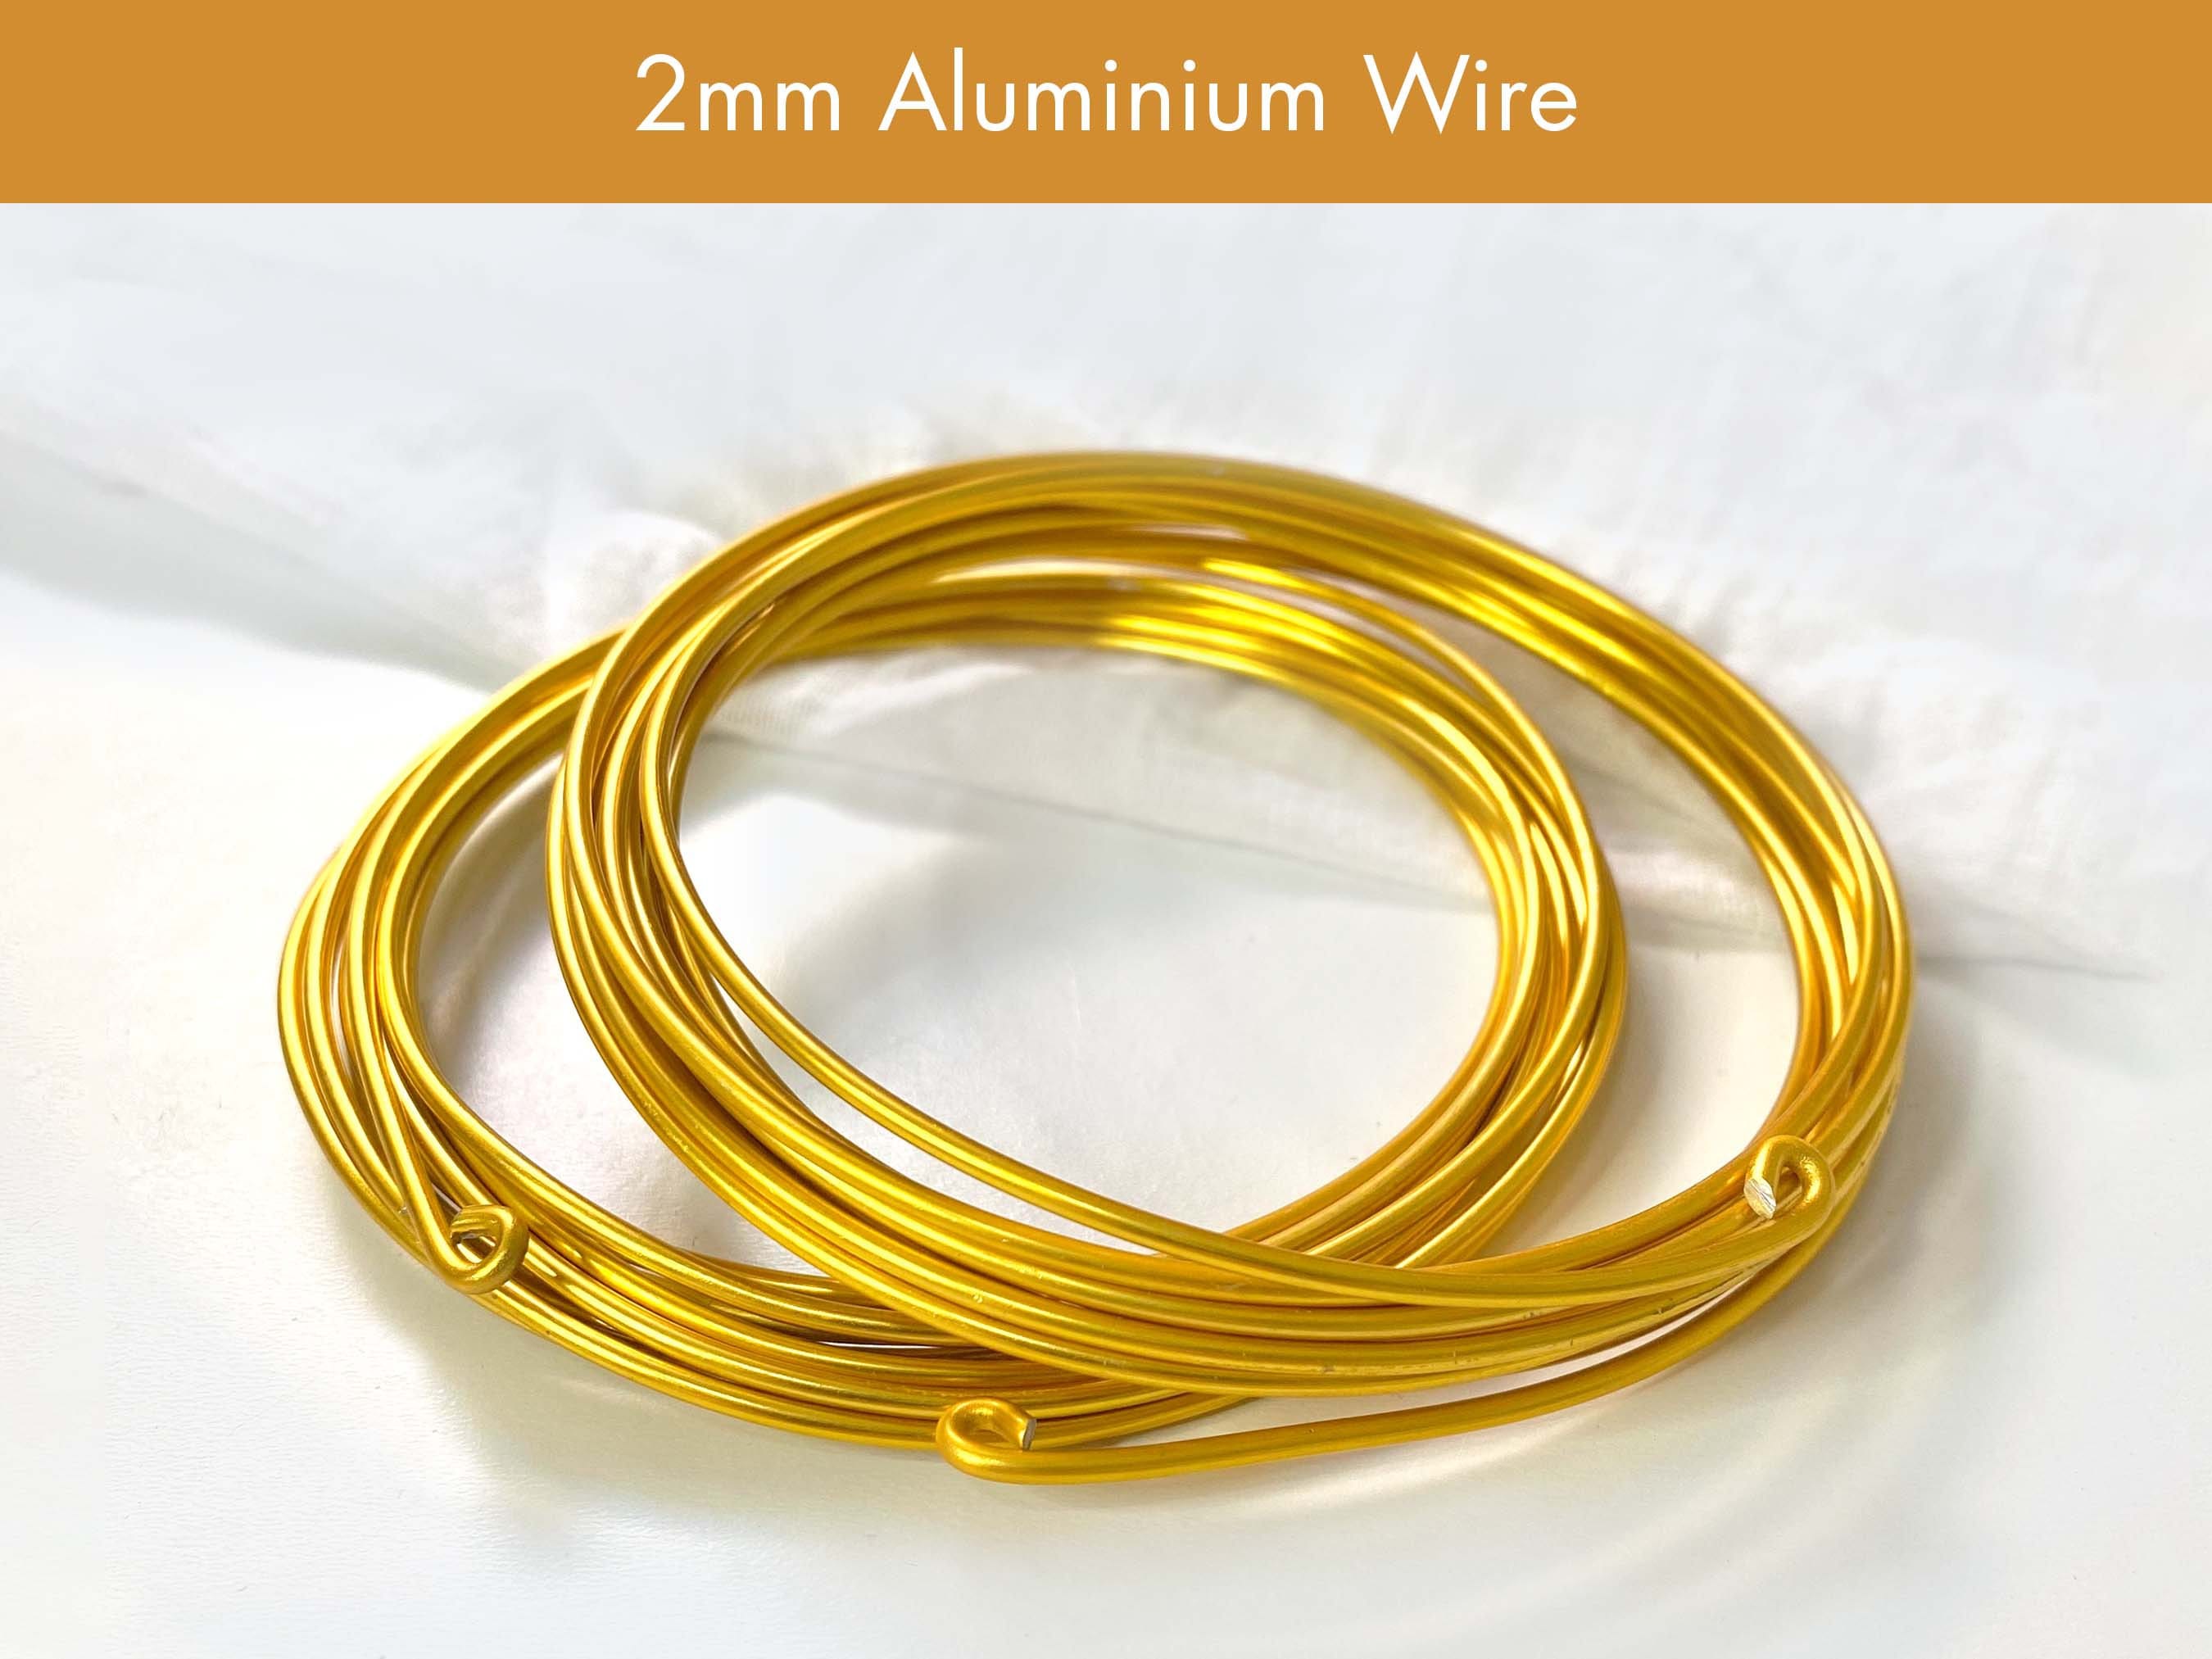 Wire Sticks 0.8 Mm, 1 Mm or 1.4 Mm for Floral Art, Wire Creation, Jewelry 